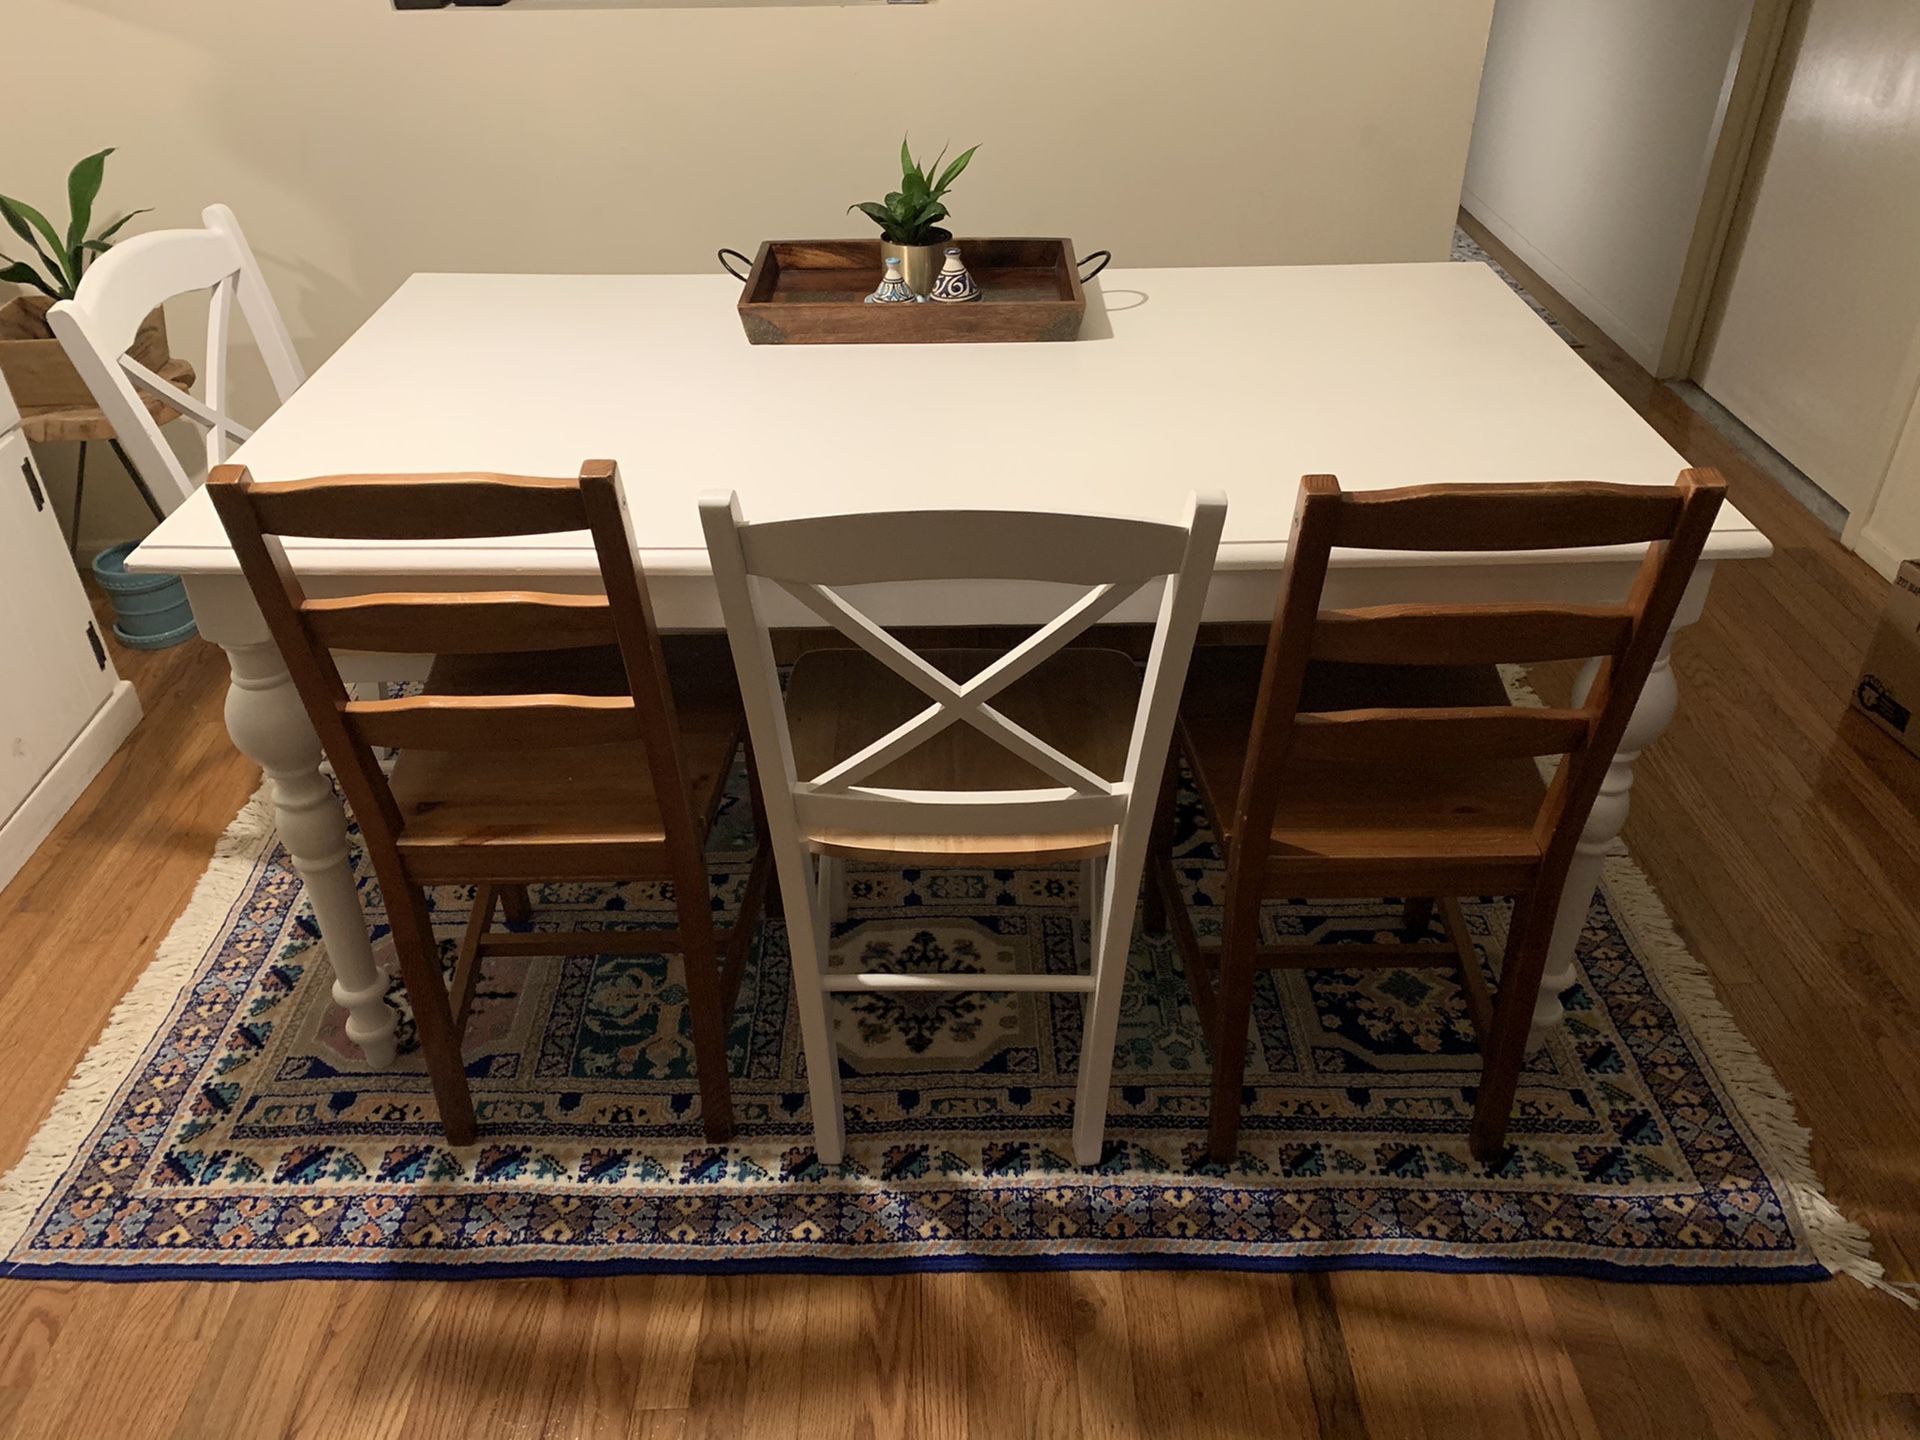 Zuo Era kitchen table (chair sold separately) $1100 retail!